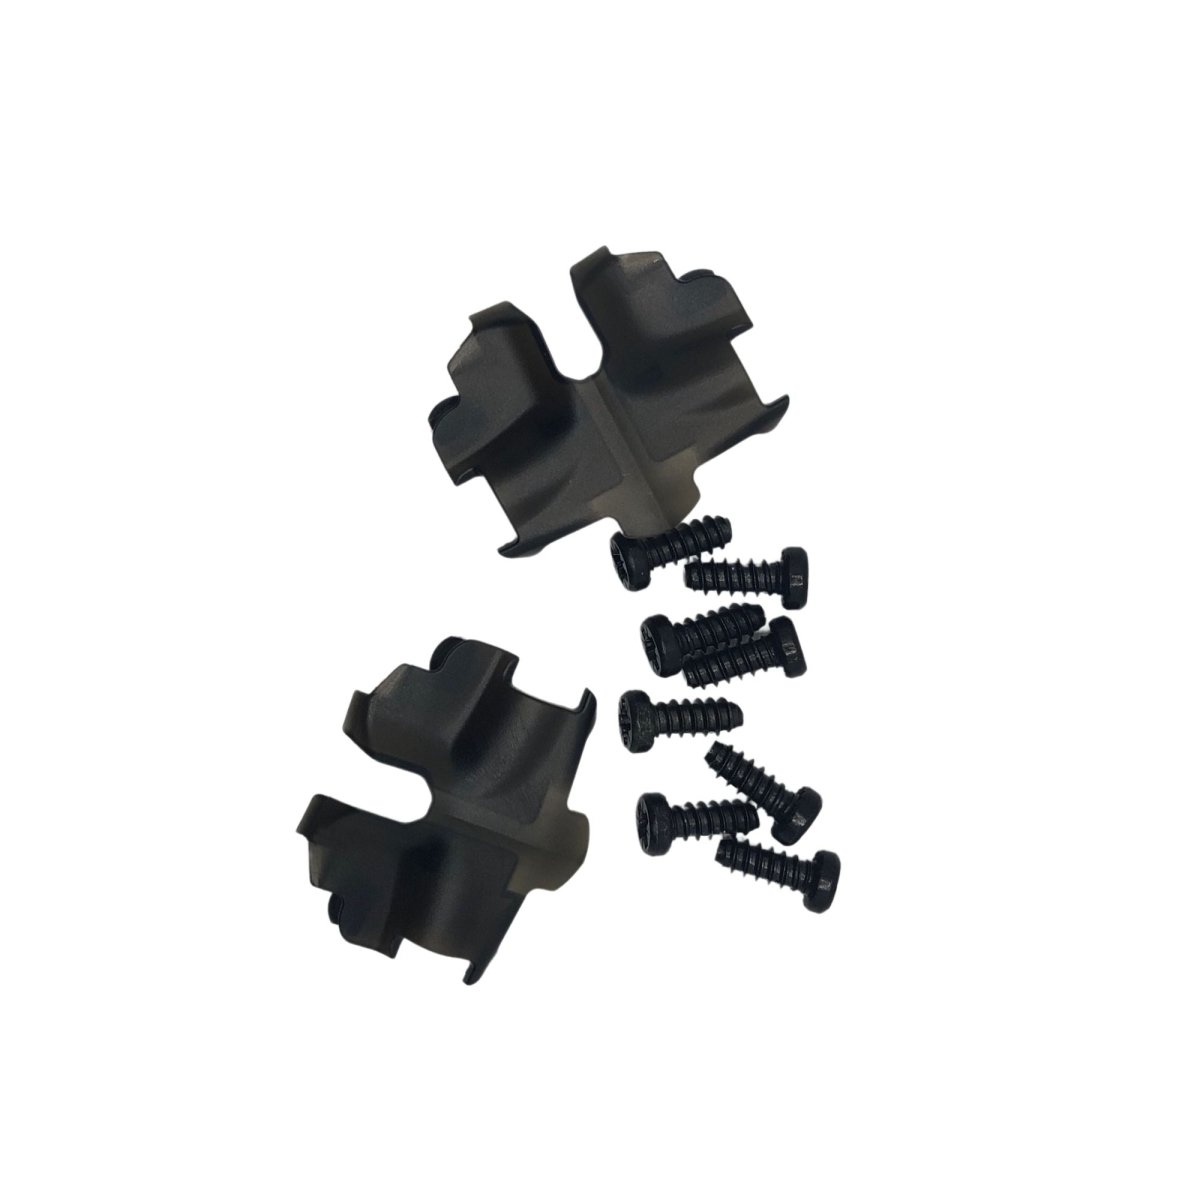 ION 10 & 12 Heel Mounting Screws (8 pcs) - Parts - G3 Store [CAD]